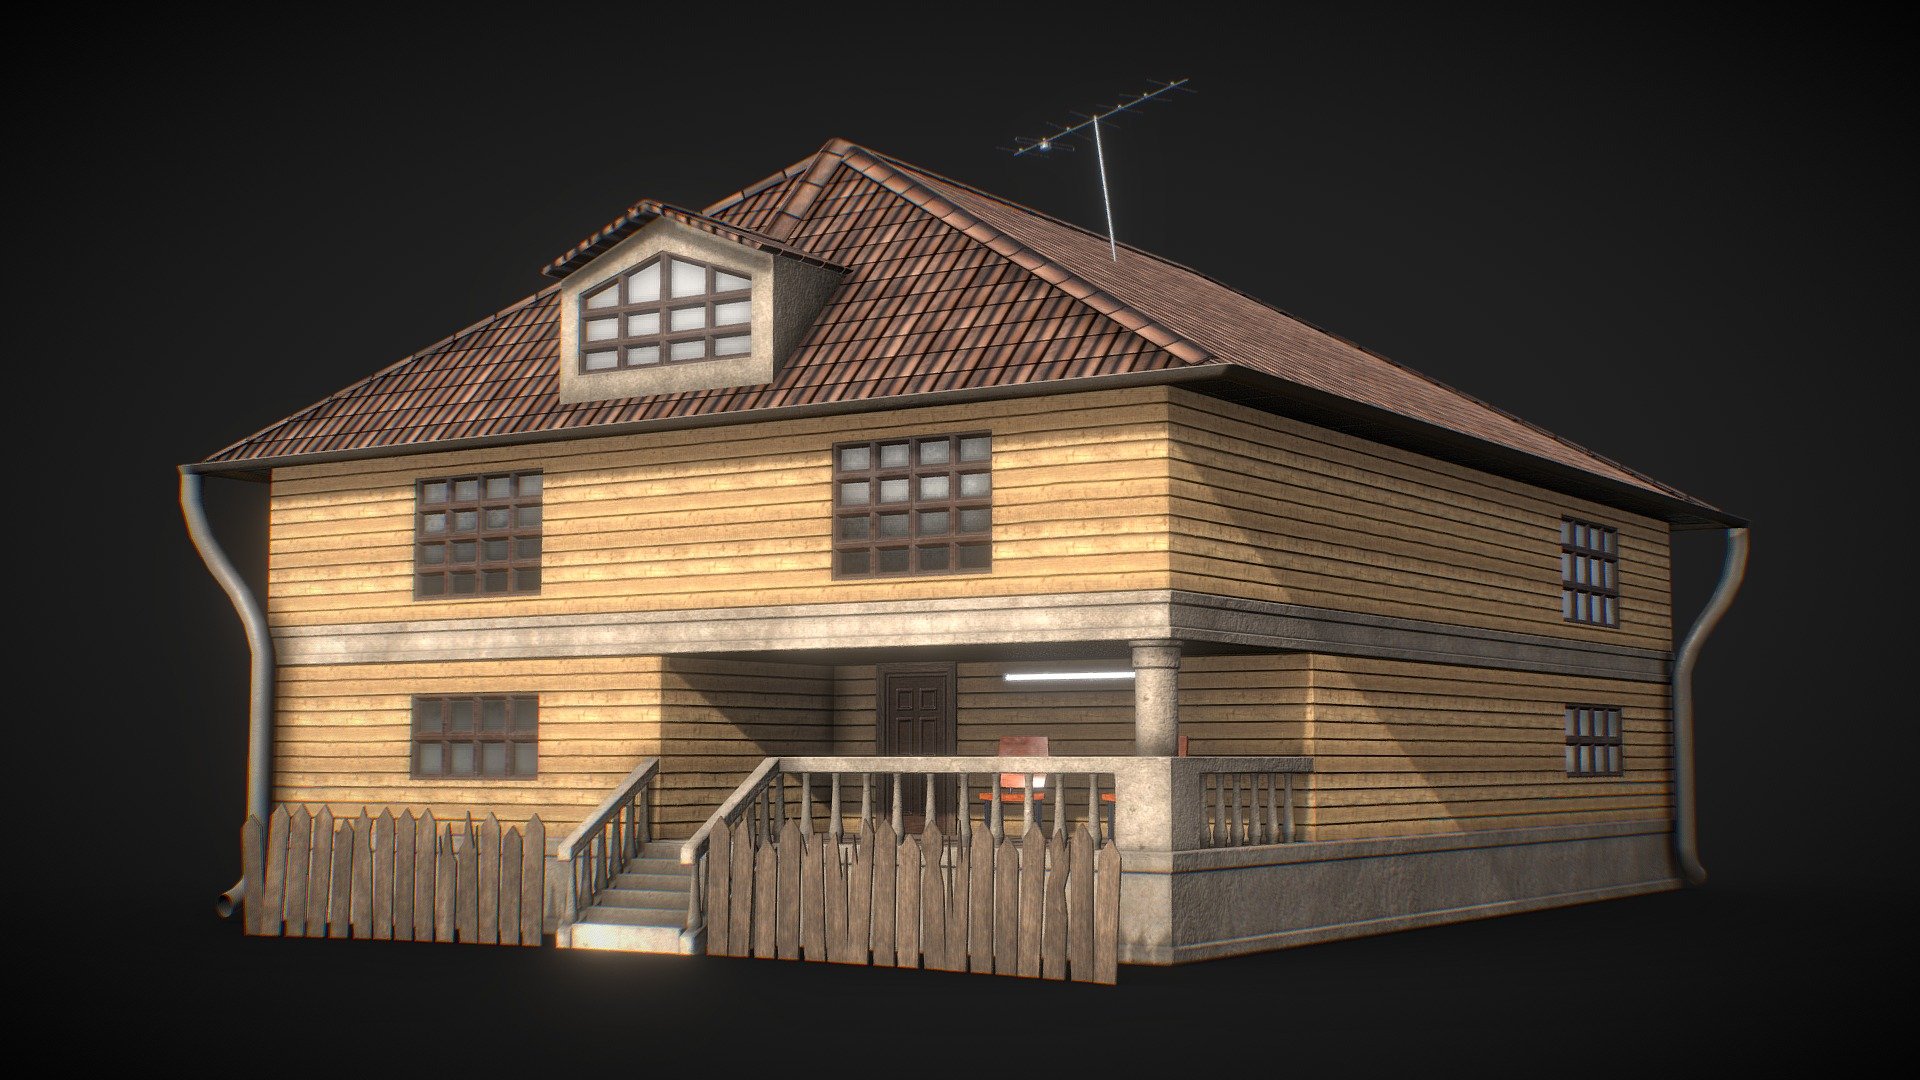 Stay Tuned, A whole album of Medival assets coming up soon!


Medival House A - Low Poly - PBR Textures
Game Ready / Unreal Engine / Unity - Directly import with texture maps and start using.
Contact me if you want 4k textures or/and the non triangulated version of this model - dsaalister@gmail.com - Medival House A - Download Free 3D model by Allay Design (@Alister.Dsa) 3d model